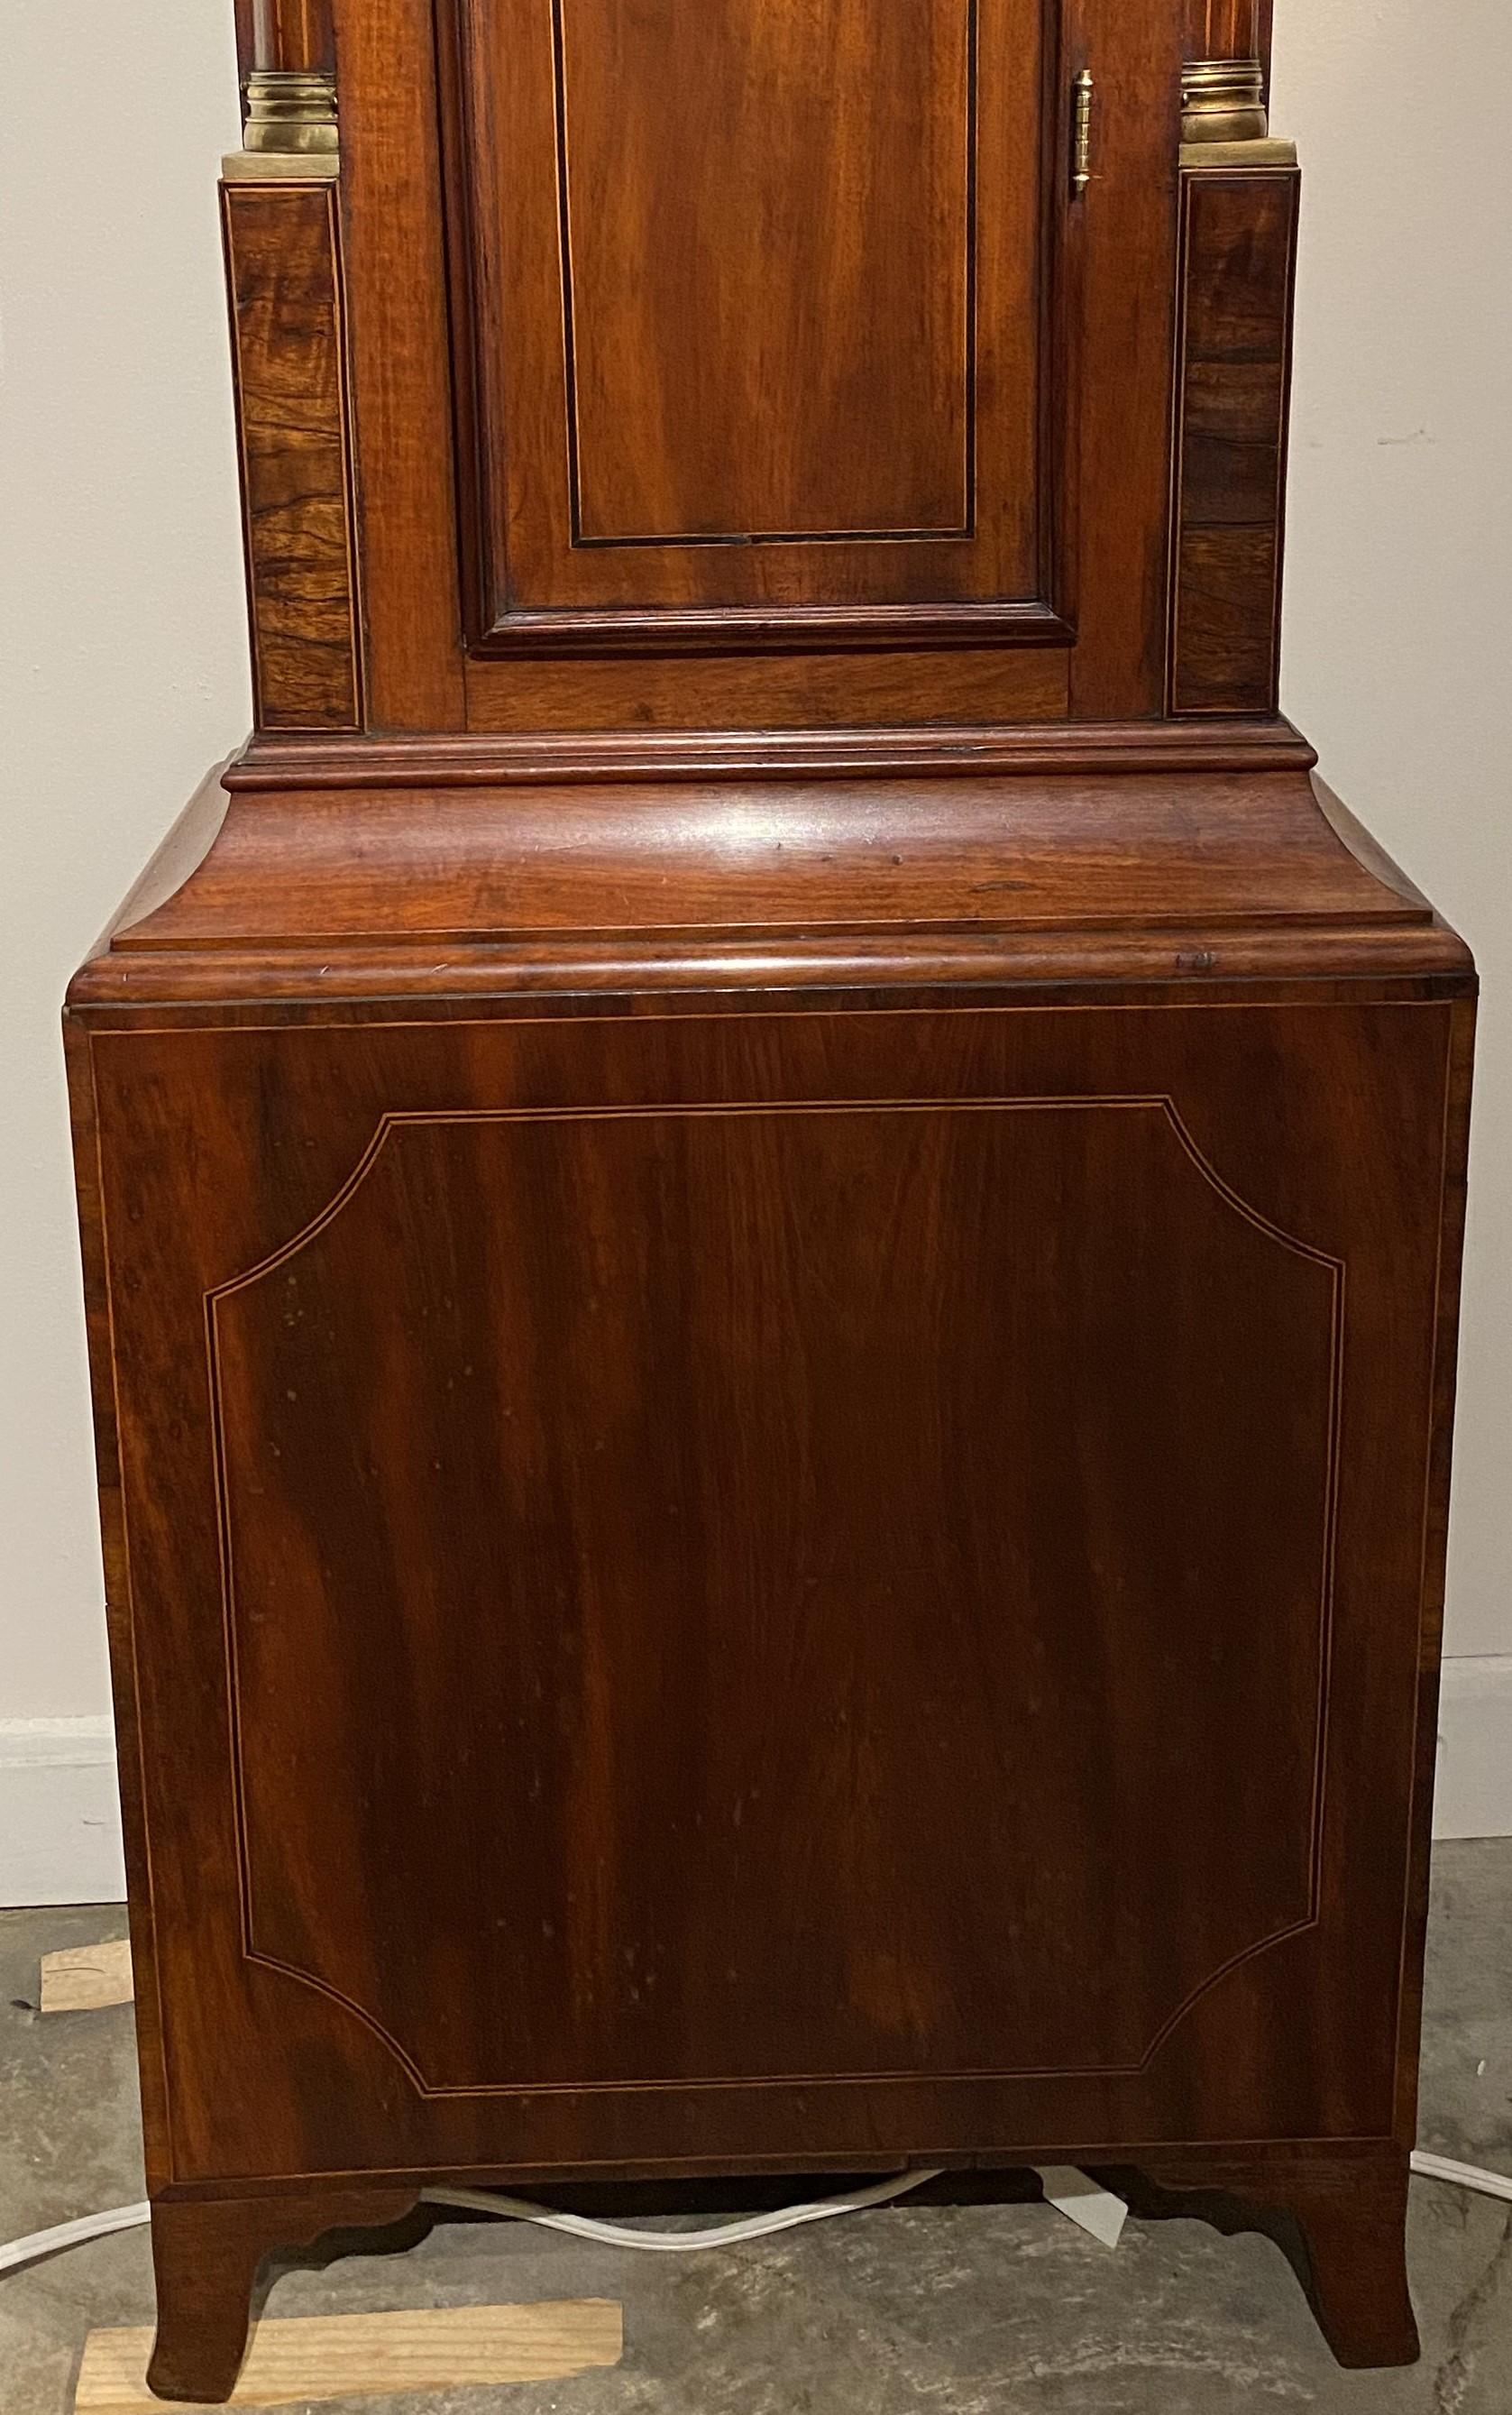 Hand-Carved William Cummens Federal Mahogany Tall Clock with Moon Phase Dial circa 1820 For Sale